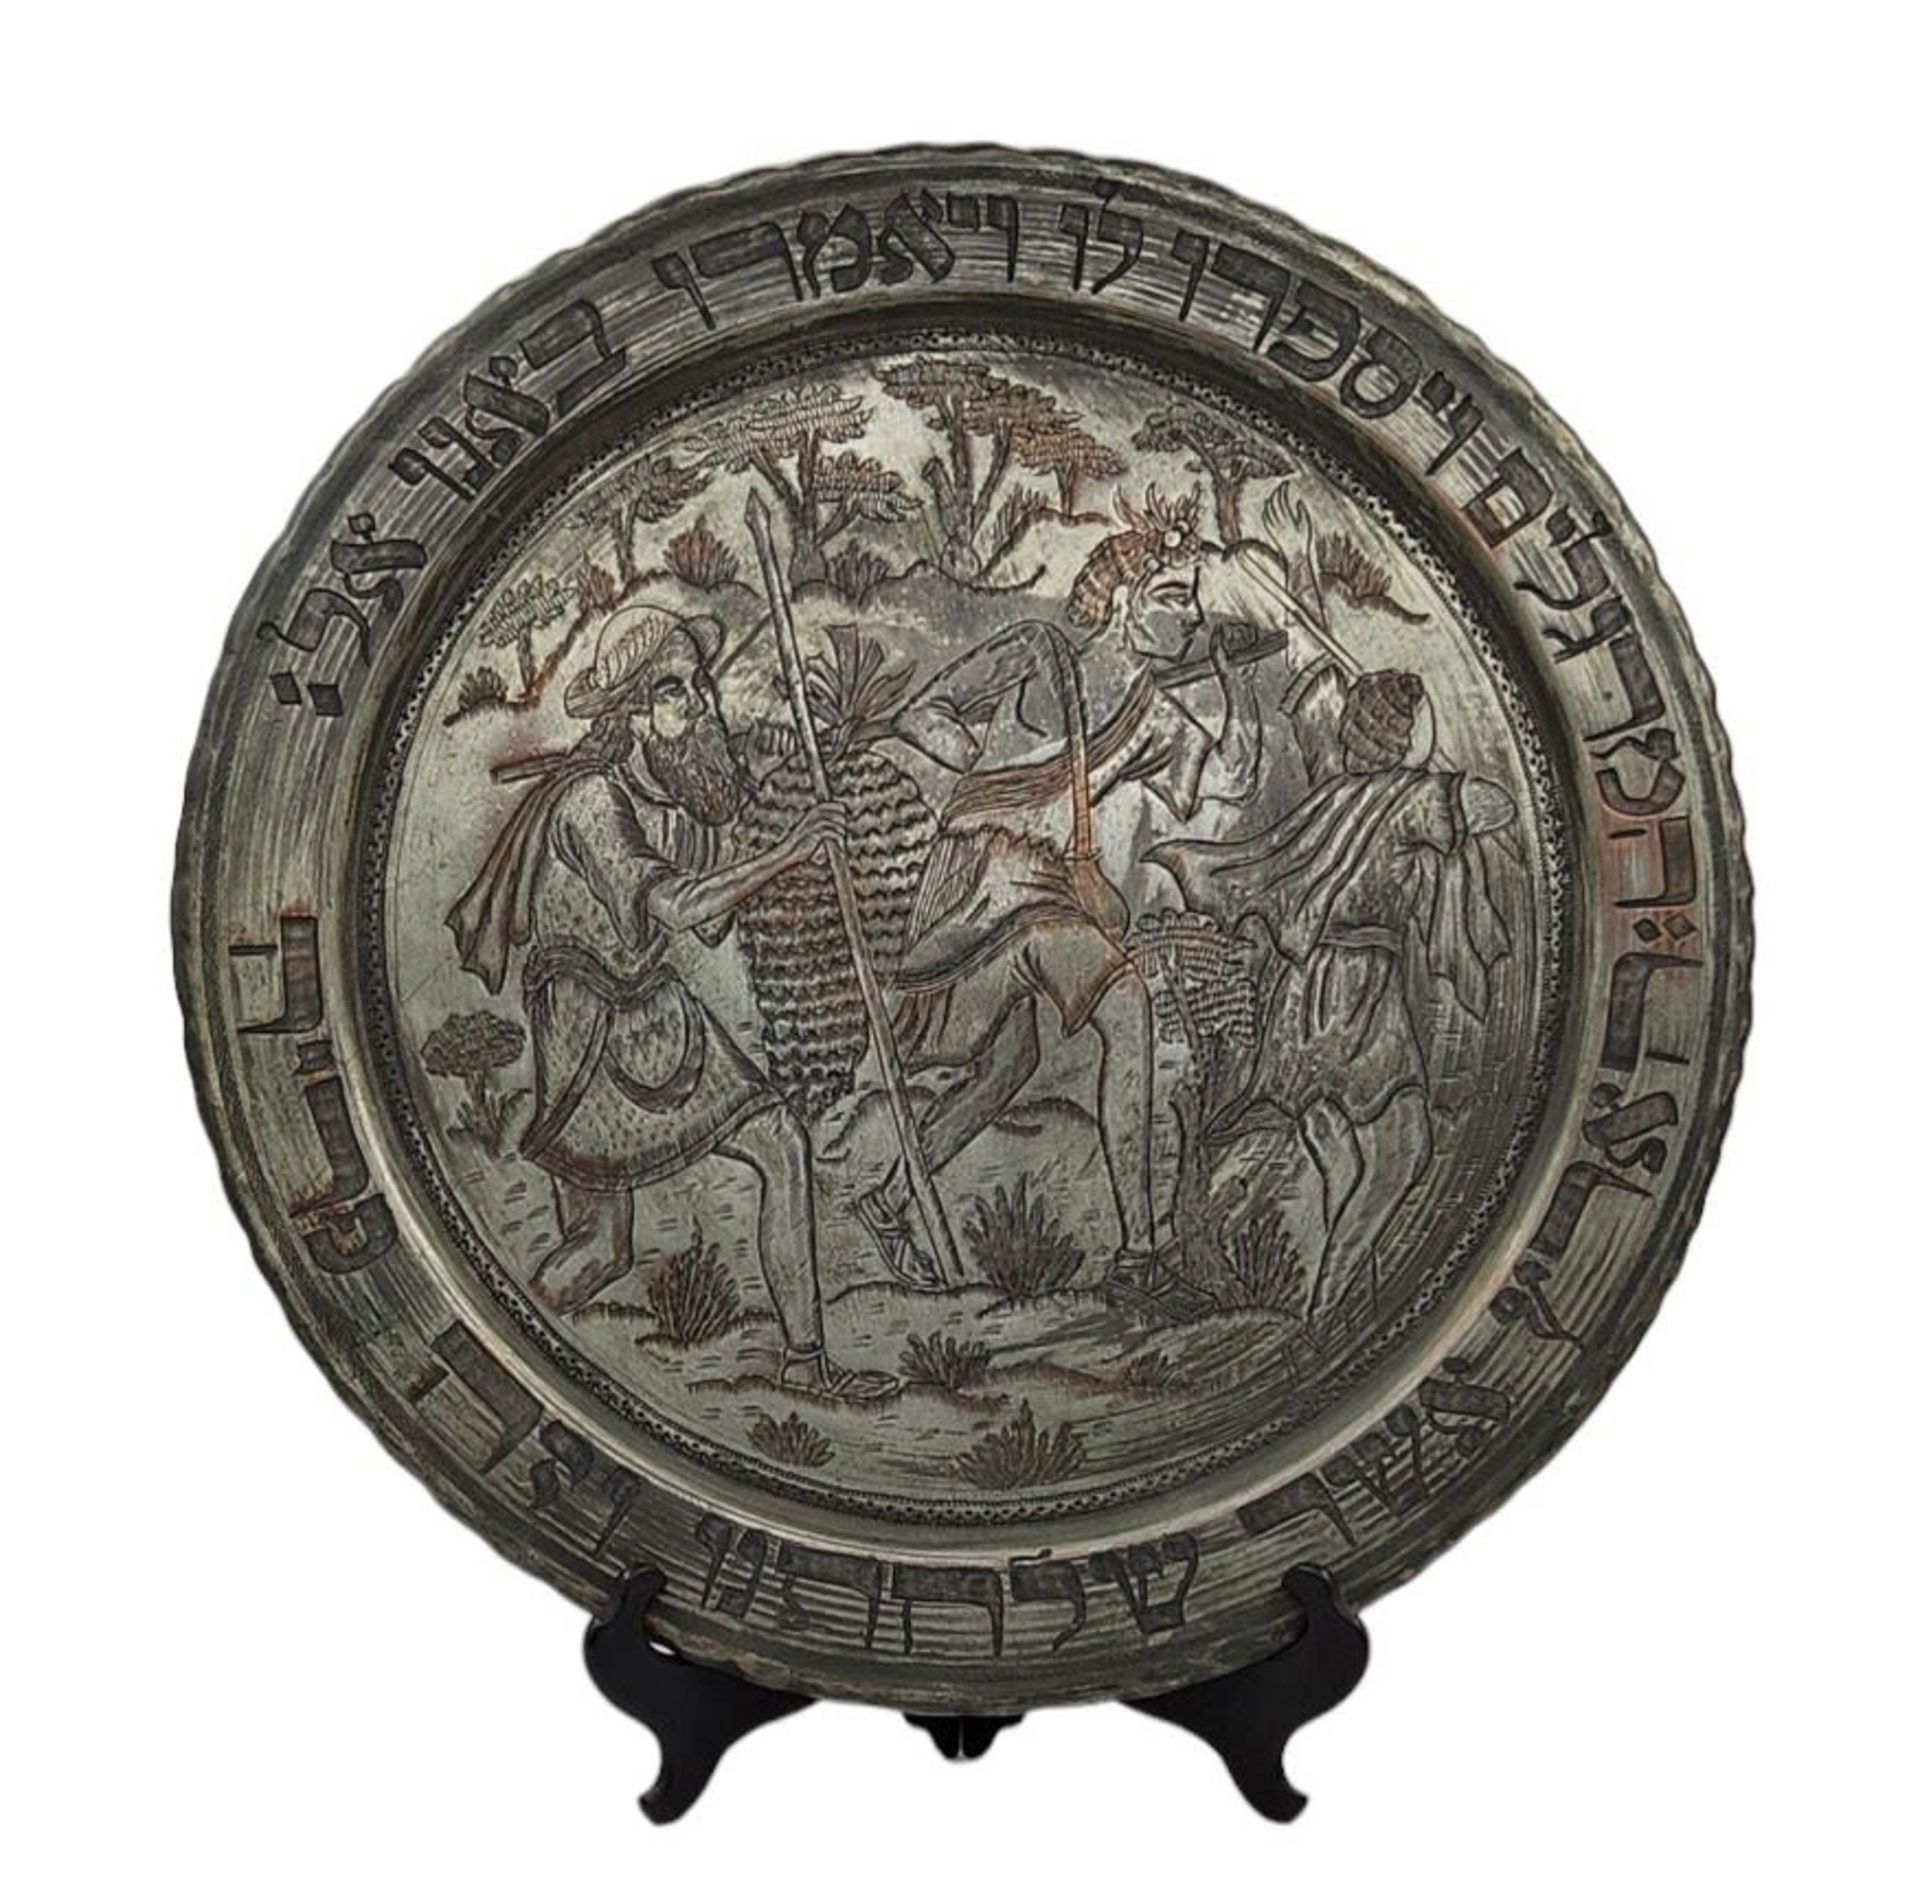 Decorative Persian tray made of copper and tin plating, decorated with hand-engraved decorations